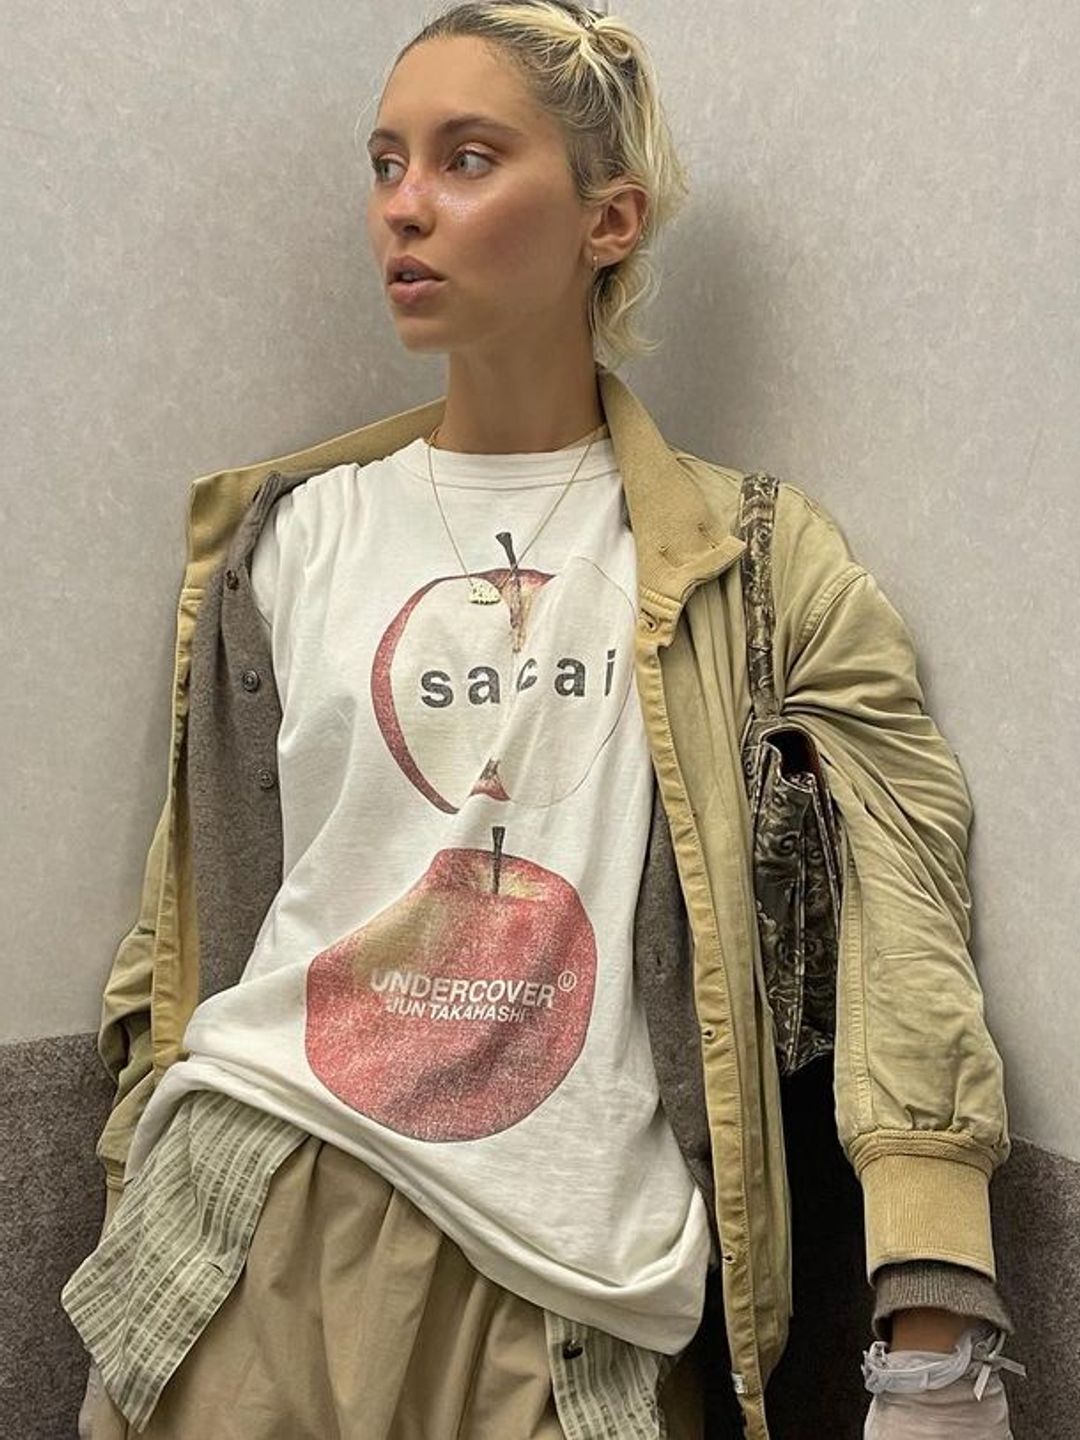 Iris Law is the queen of comfortable layering